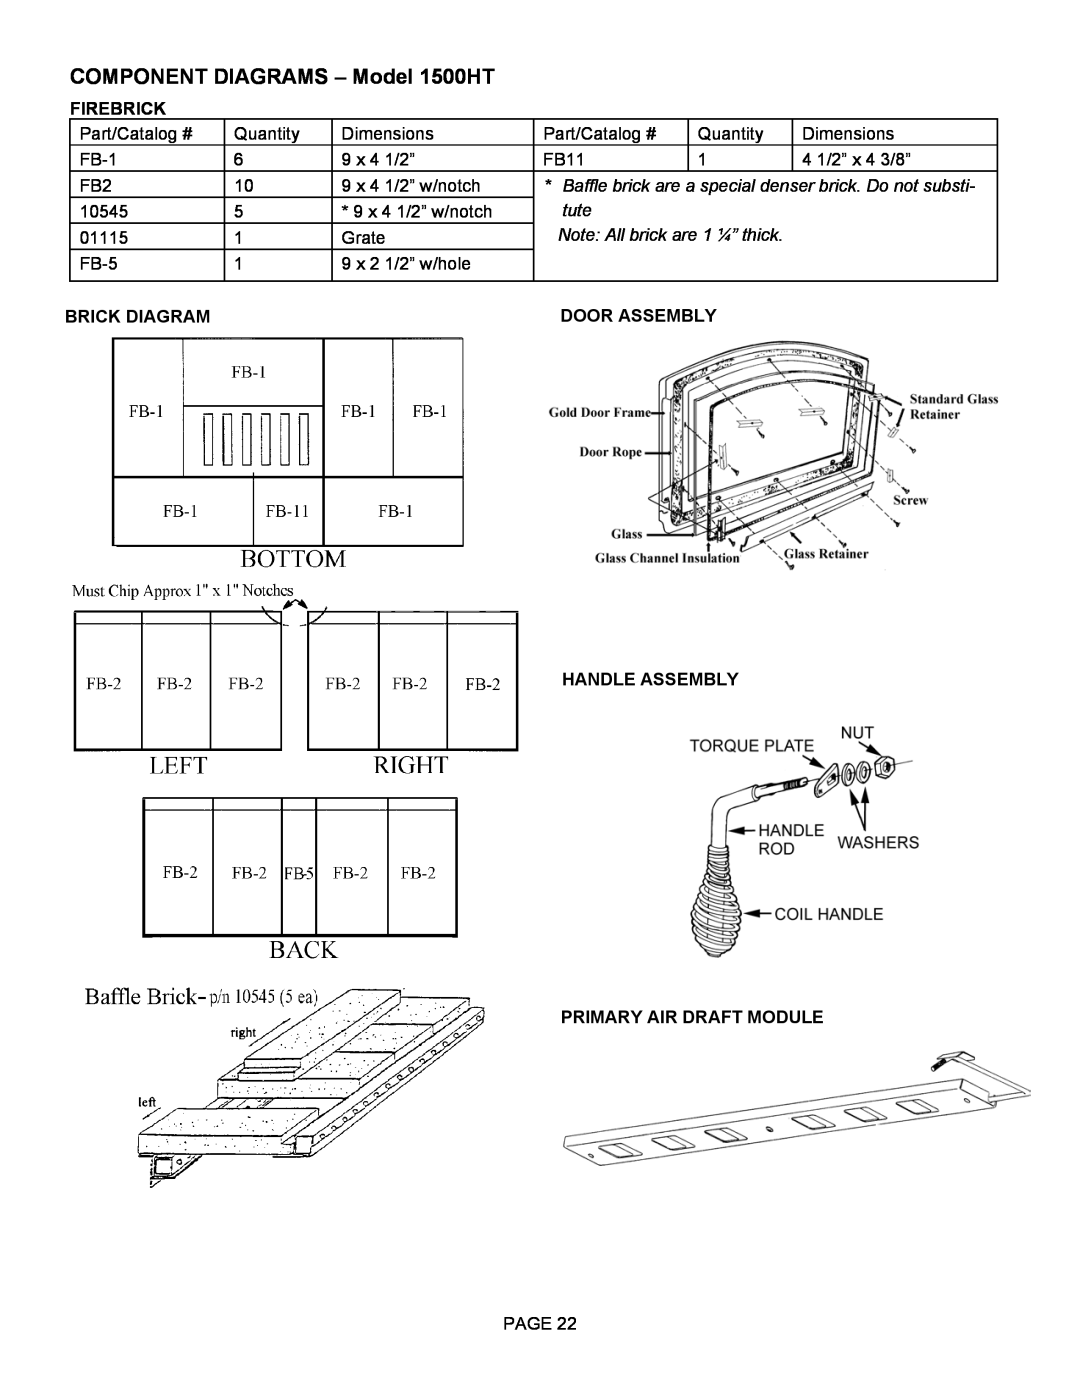 Milwaukee COMPONENT DIAGRAMS - Model 1500HT, tute, Note All brick are 1 ¼” thick, Brick Diagram, Door Assembly 